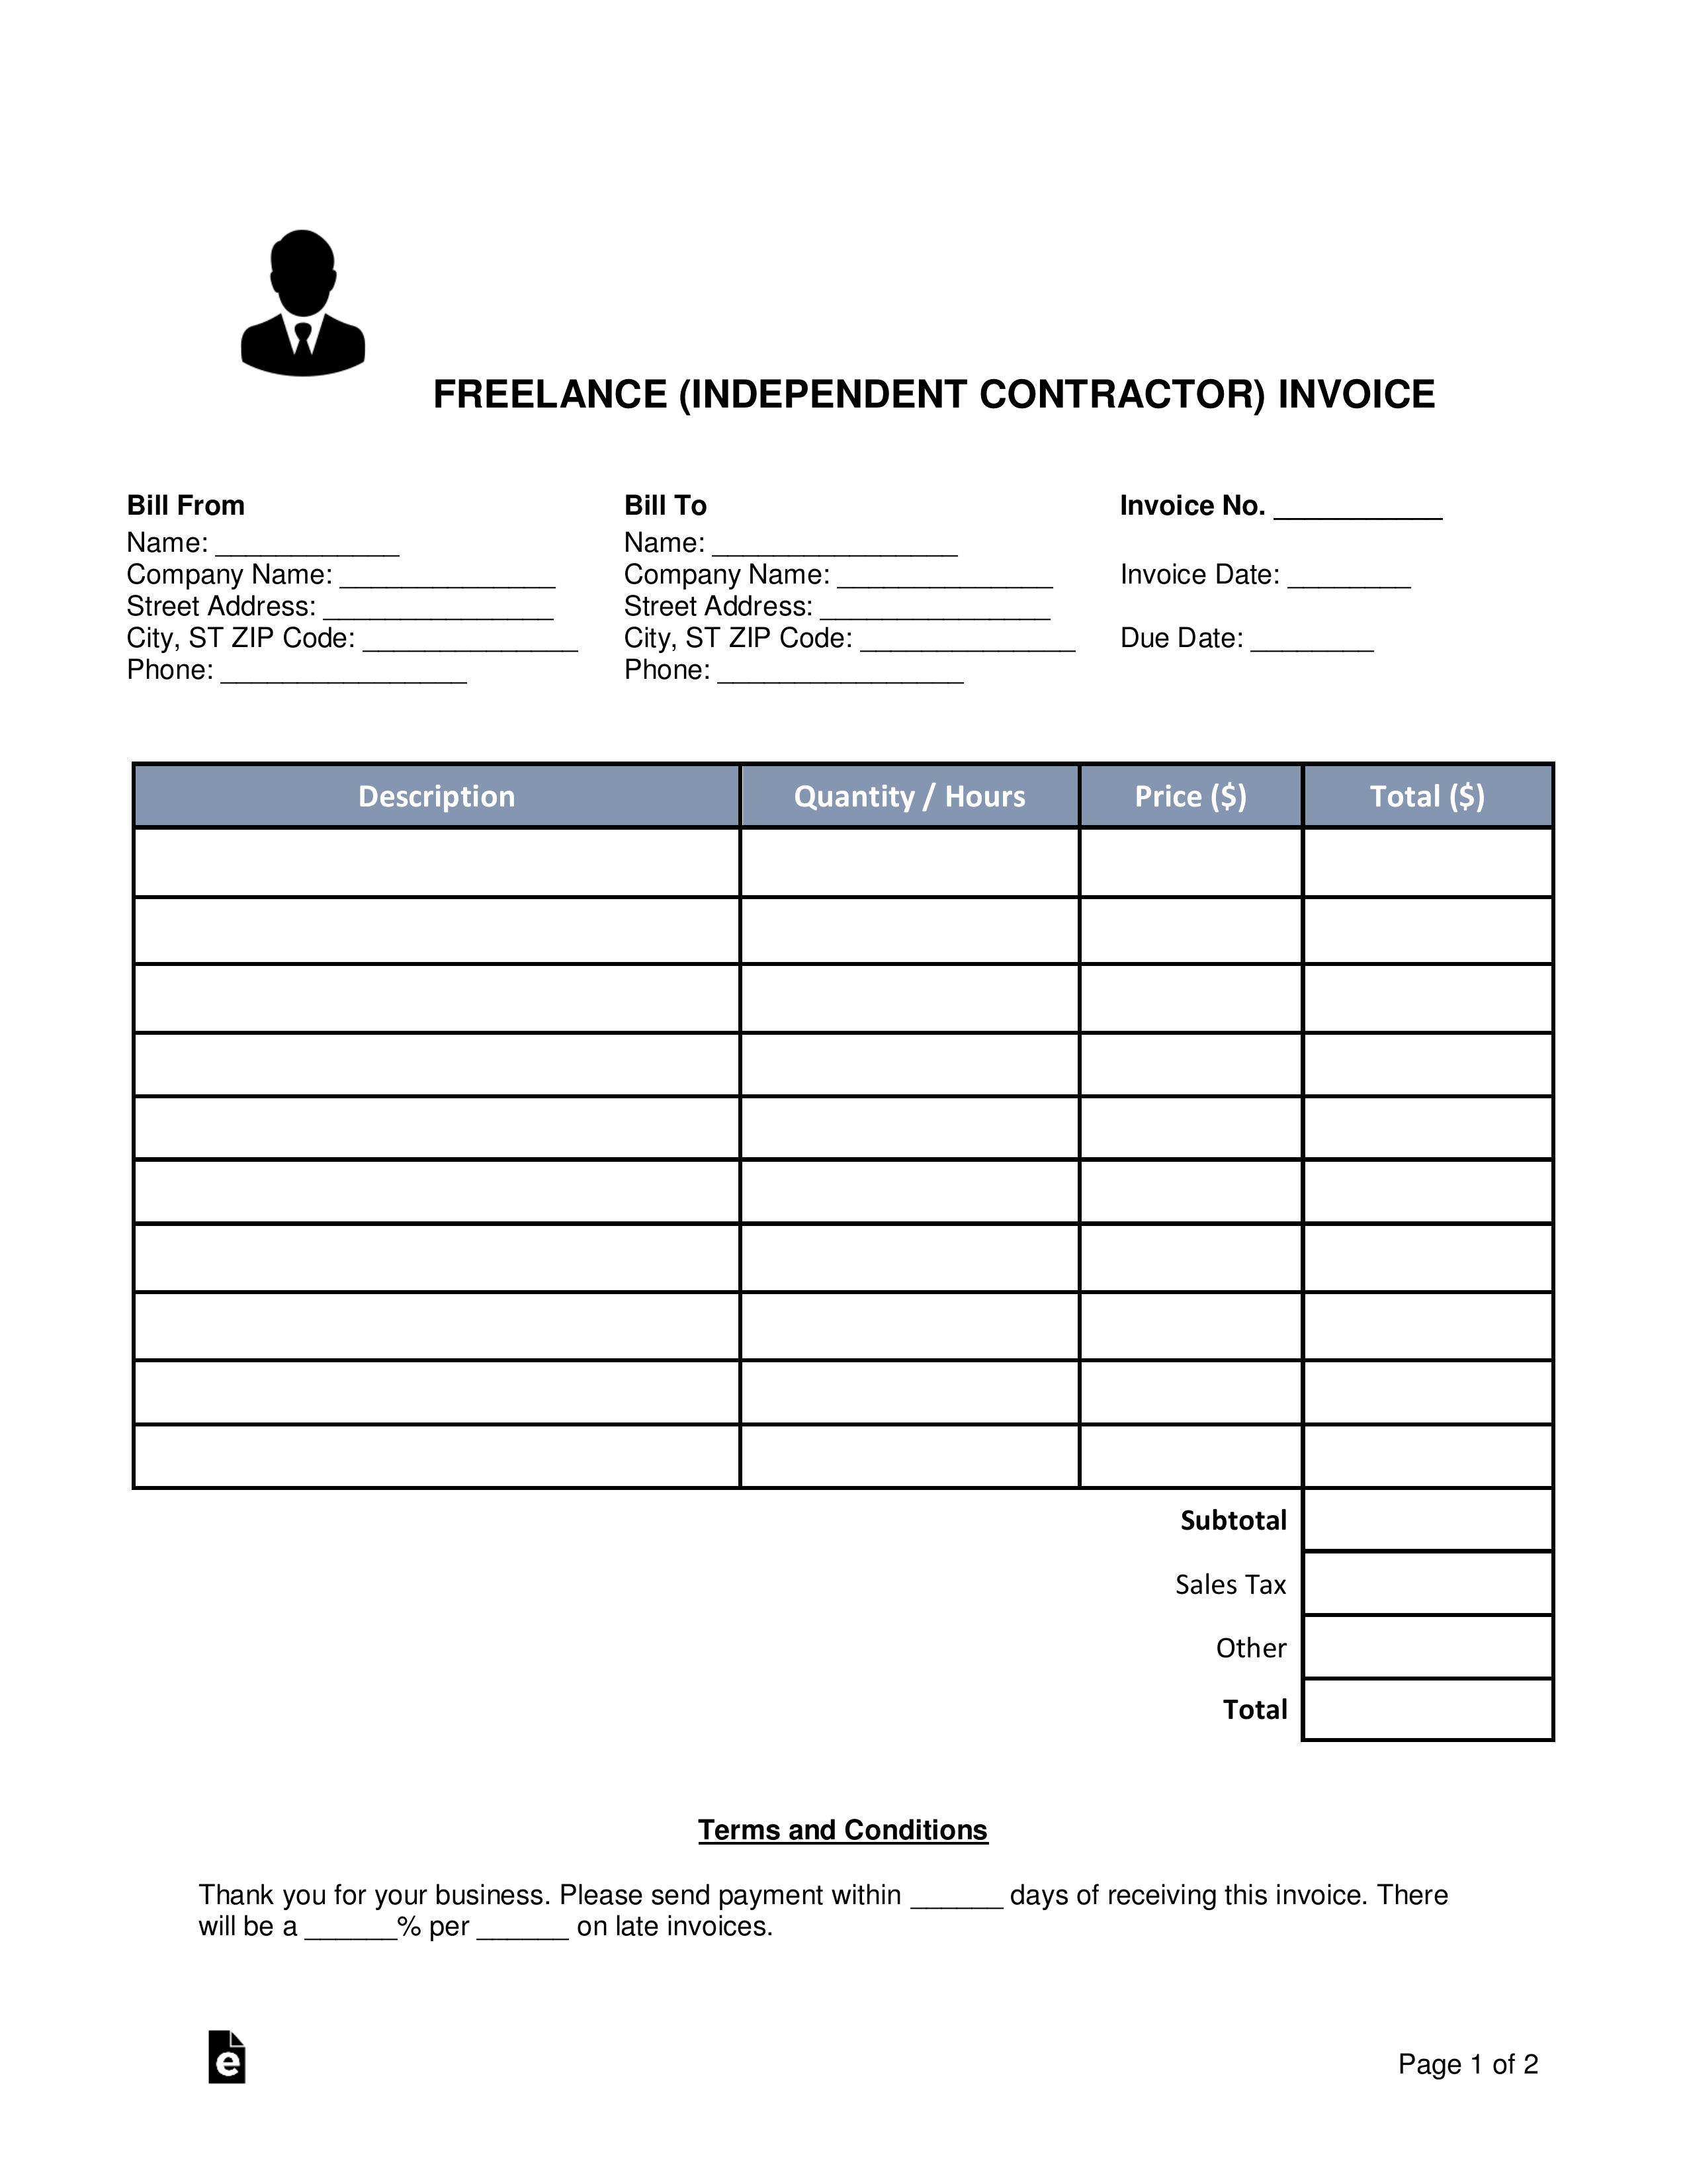 Free Freelance (Independent Contractor) Invoice Template regarding 1099 Invoice Template